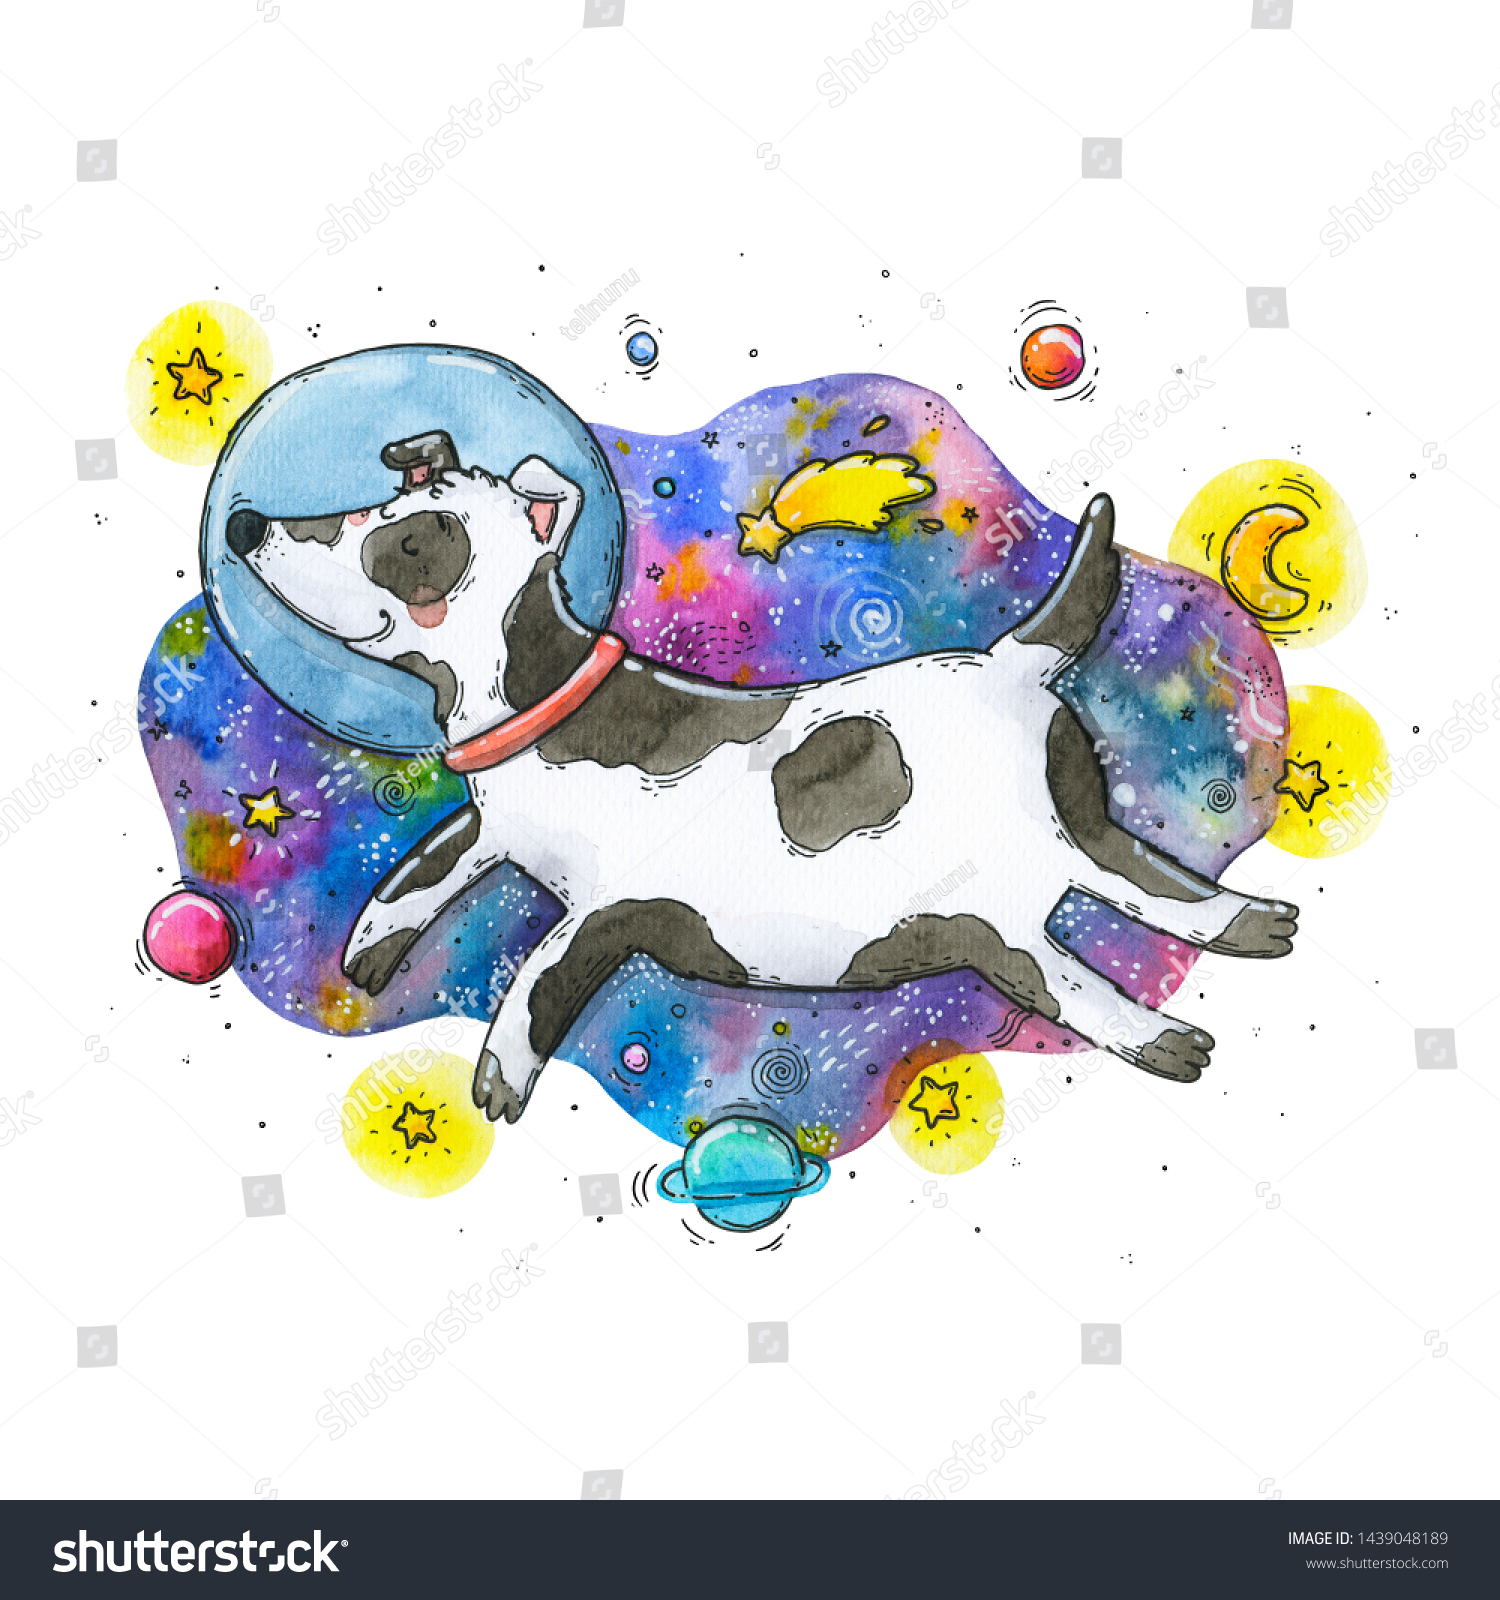 Download Watercolor Hand Drawn Illustration Of A Dreamy Dog Floating In The Colorful Cosmic Splashes Between Stars